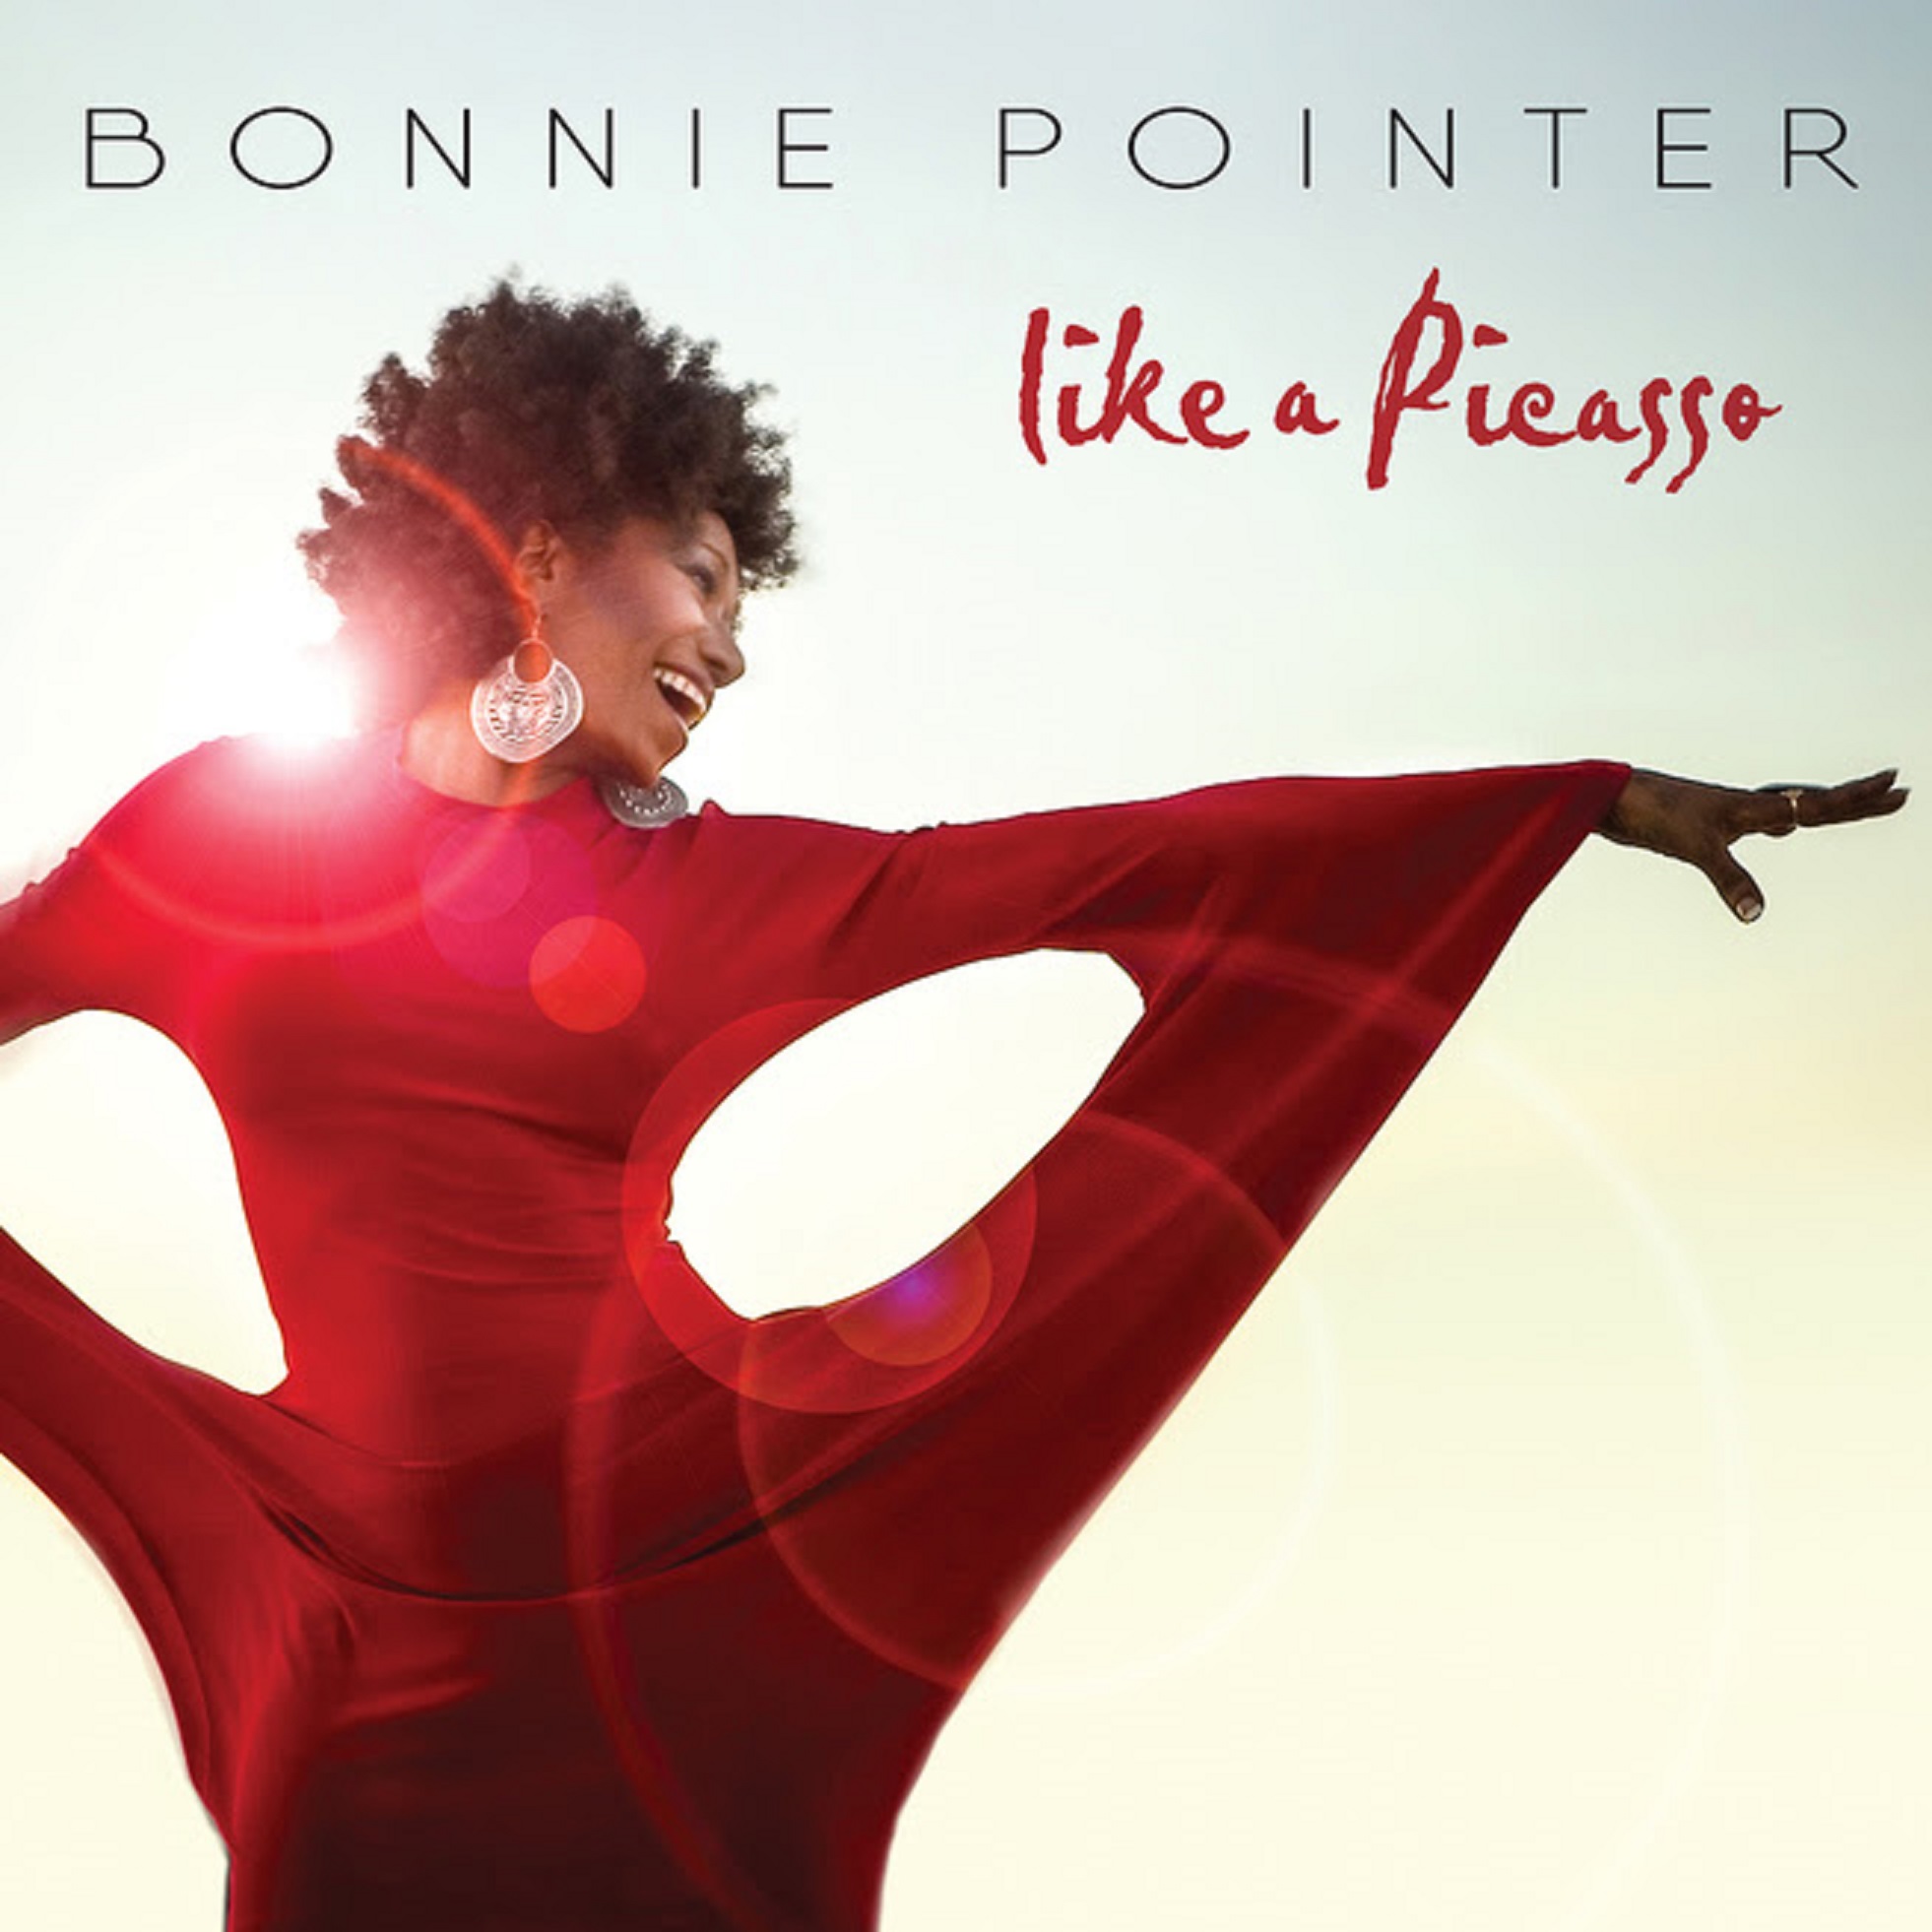 Bonnie Pointer's final album, 'Like a Picasso,' receives worldwide release on Omnivore on April 8th; contains three previously unissued tracks